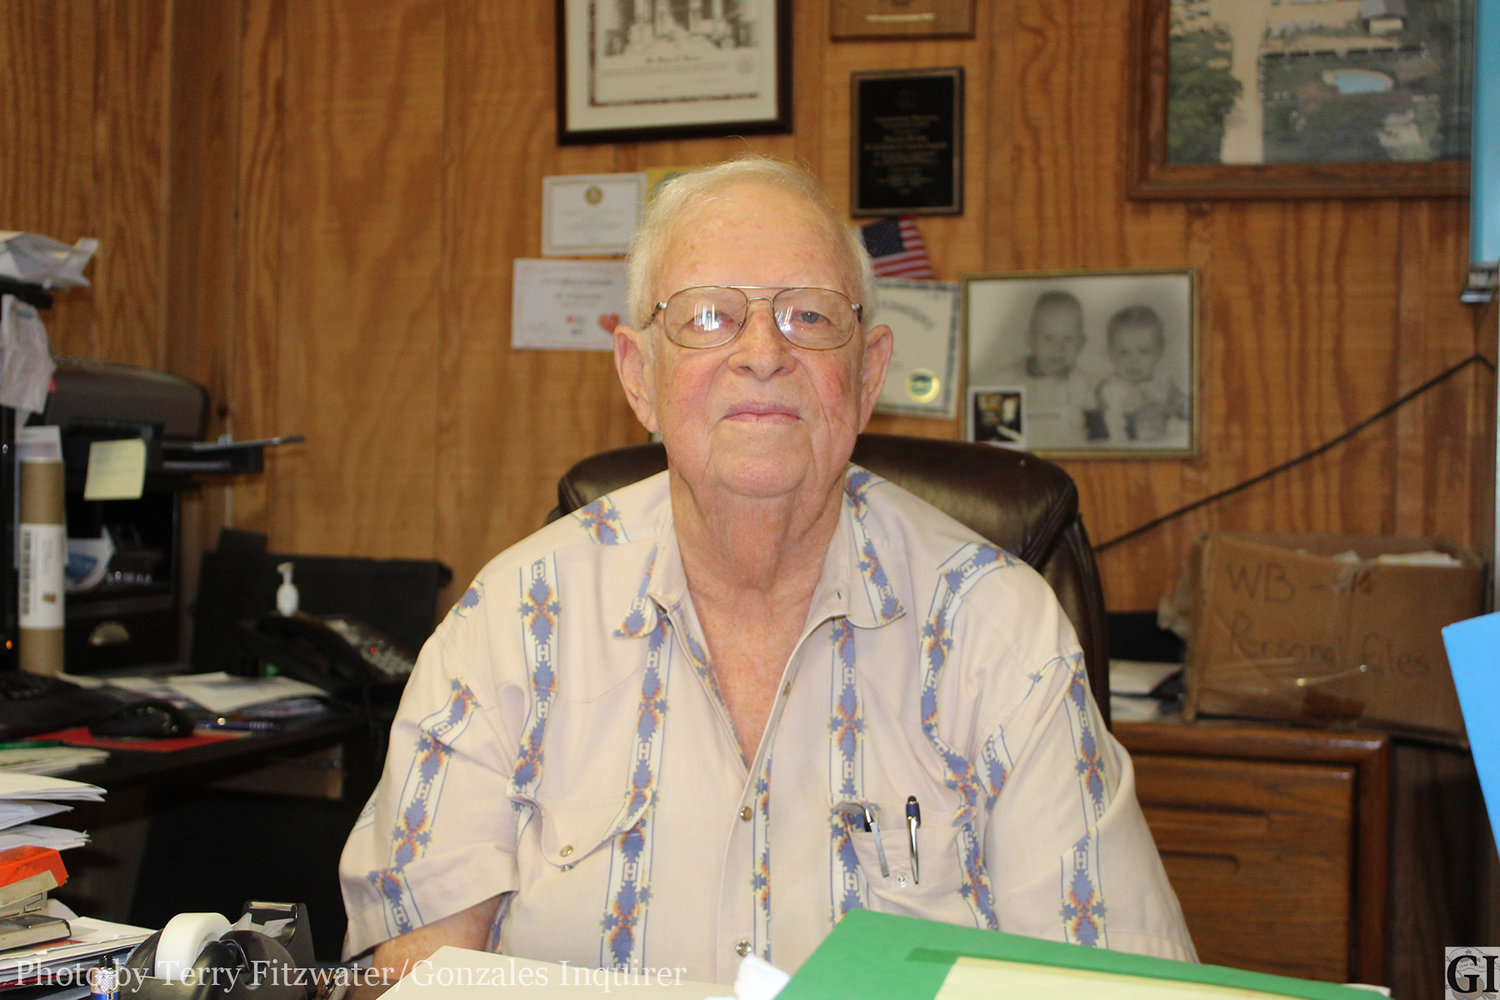 For over 50 years Wayne Brown, the owner of WB Farm and Ranch Supply, has been providing friendly, family service to people in Gonzales and south central Texas.